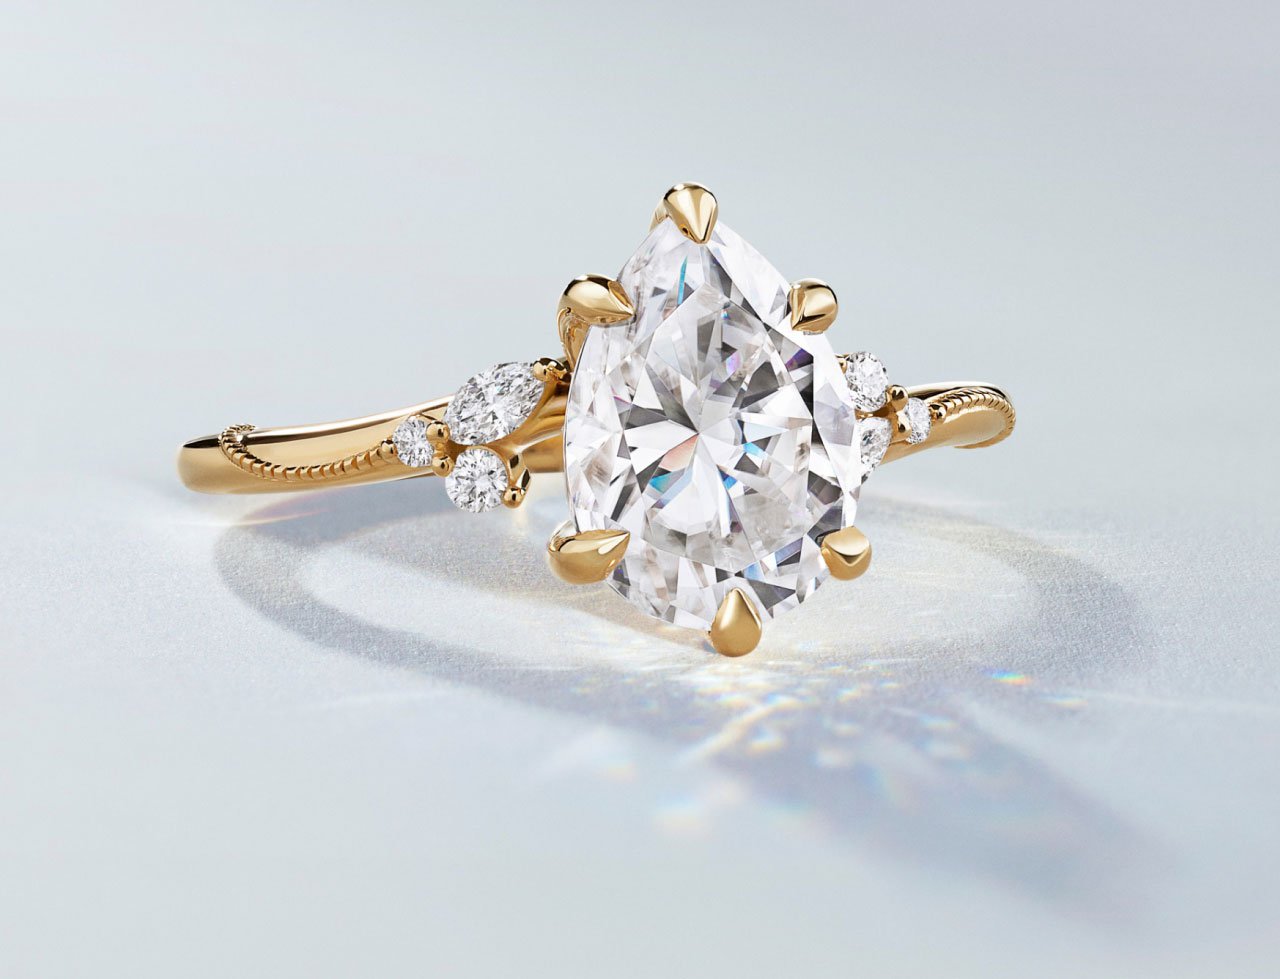 Pear diamond engagement ring from Brilliant Earth's Camellia collection.